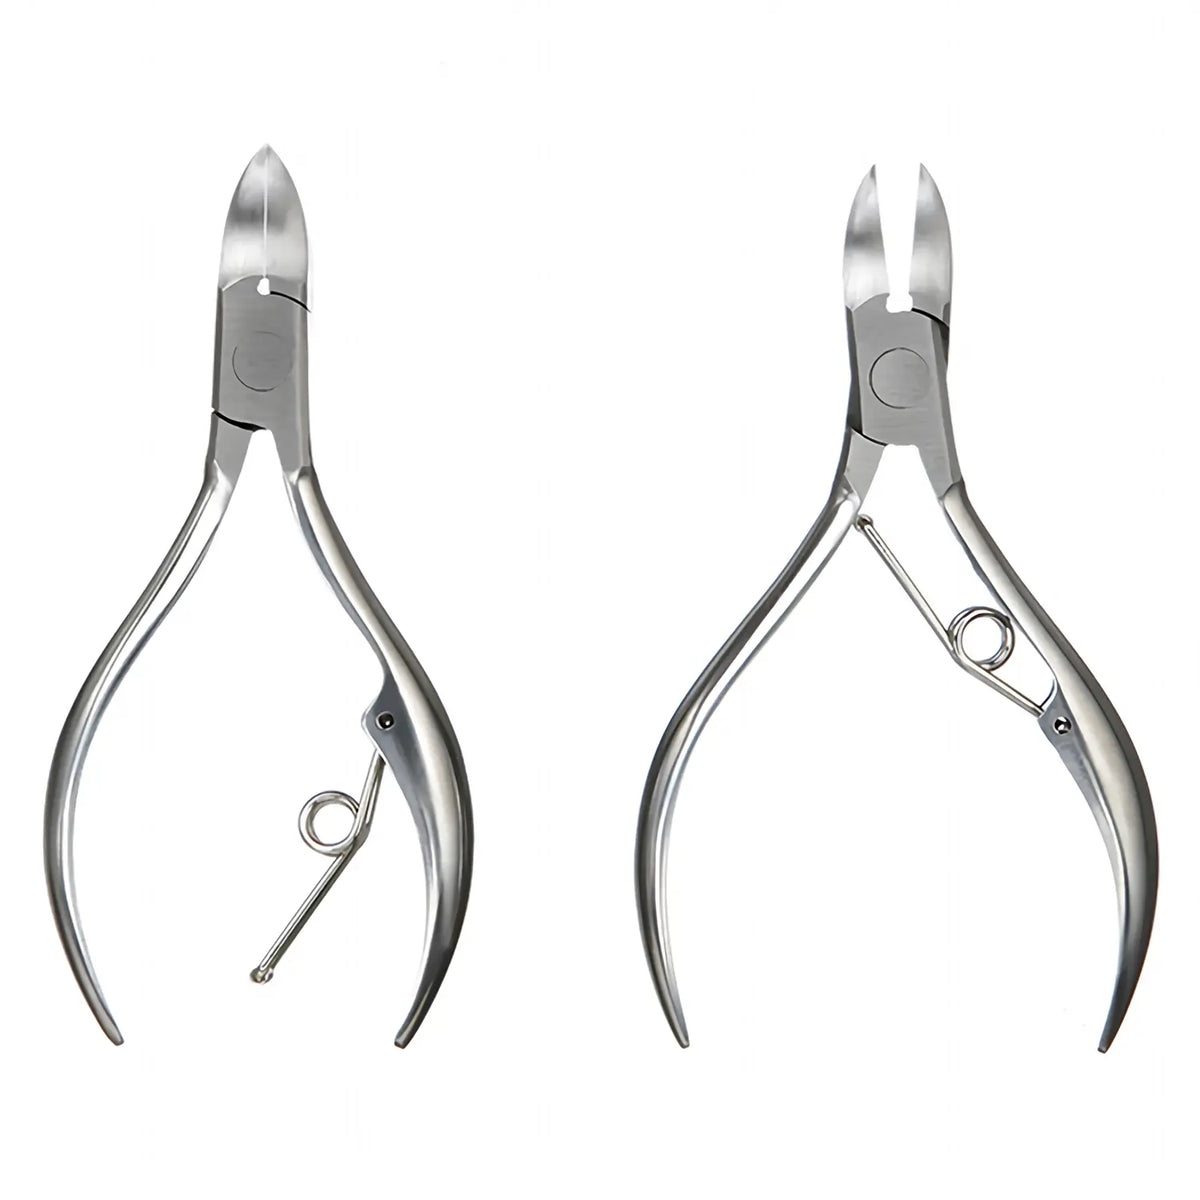 Green Bell Takuminowaza Stainless Steel Nail Nipper with Shield